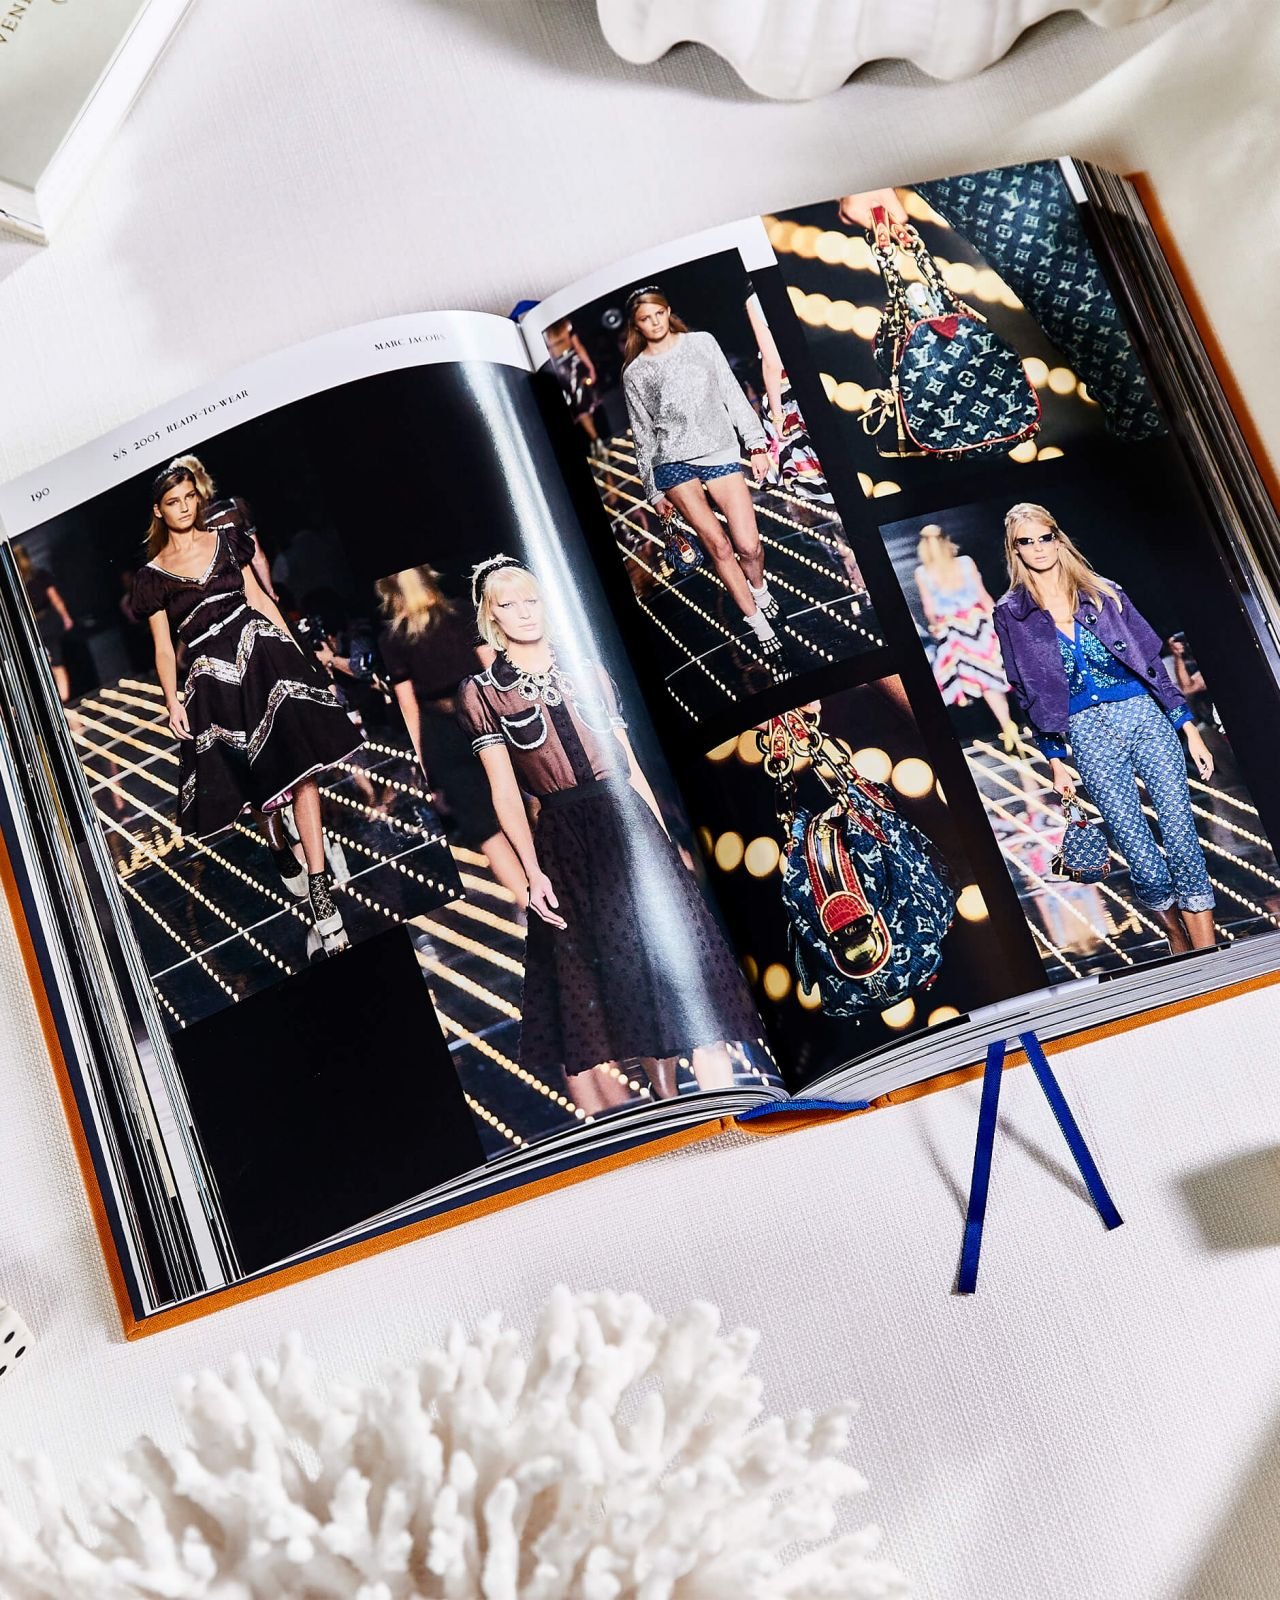 Louis Vuitton Catwalk: The Complete Fashion Collections Hardcover Book by  Jo Ellison & Louise Rytter